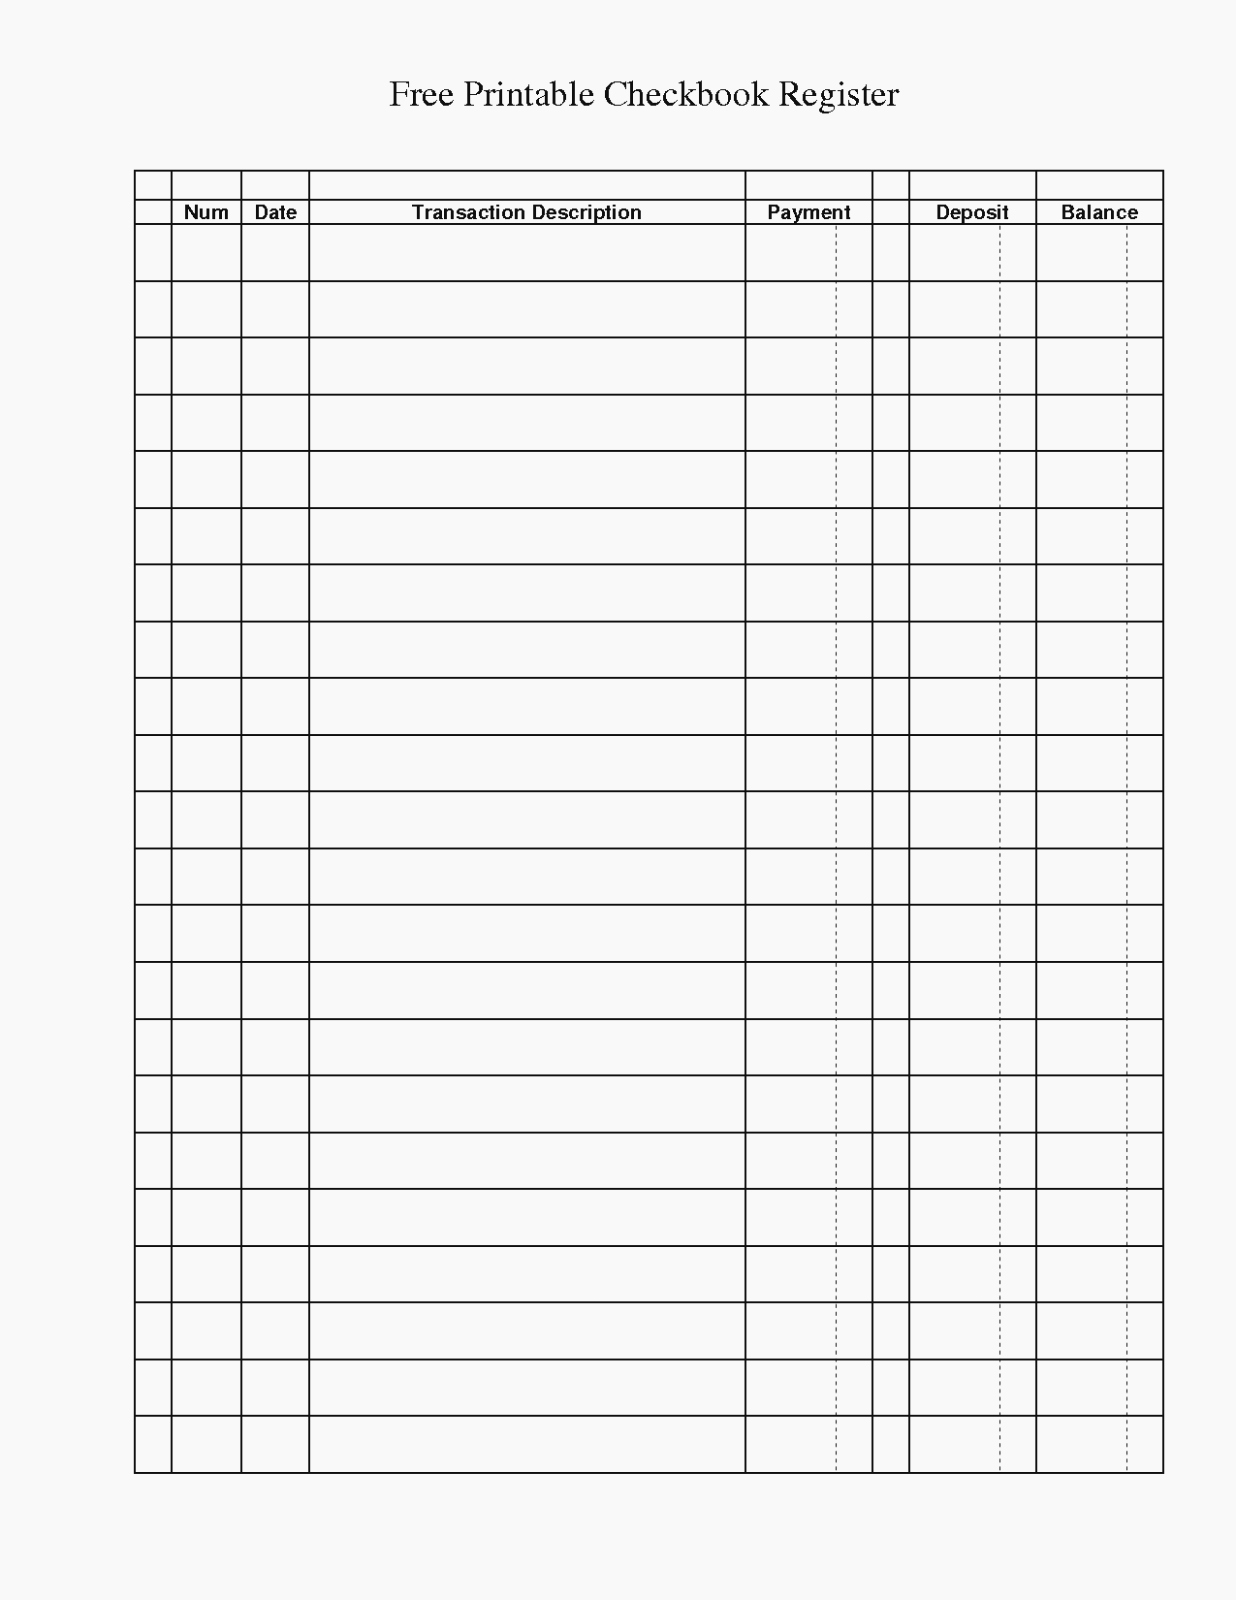 Free Printable Ledger Paper Awesome Basic Ledger Template Filename Account General Ideal Pl